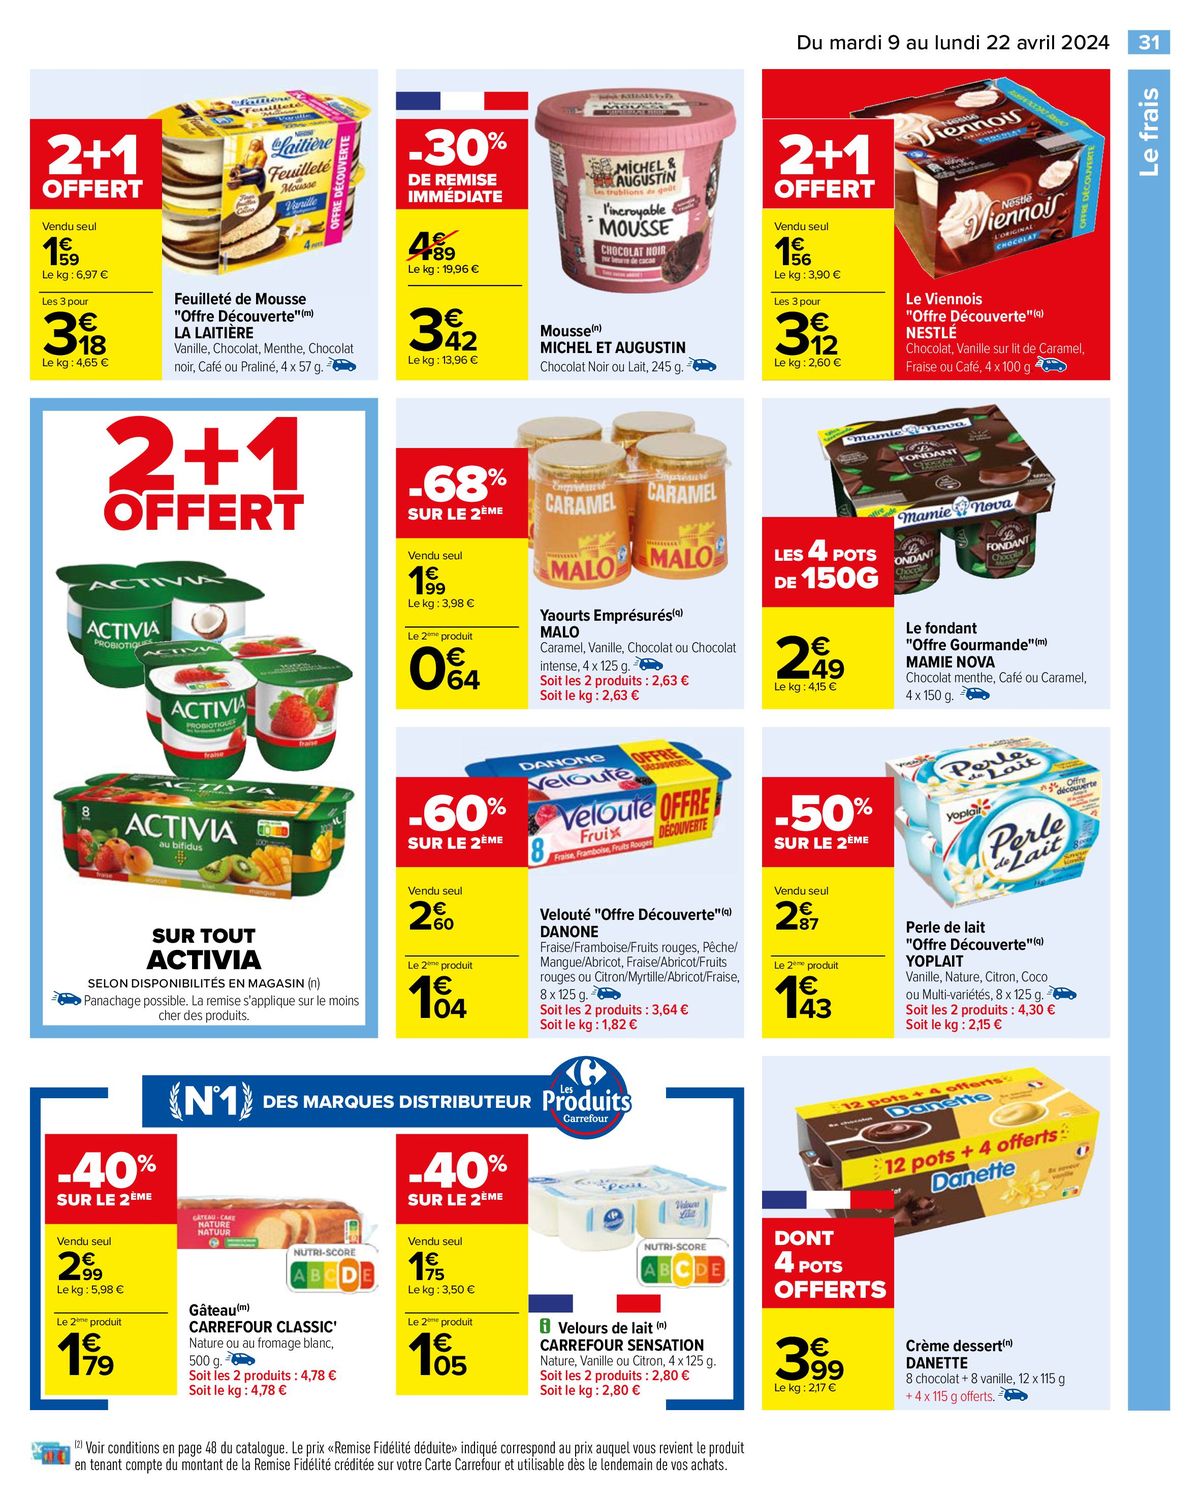 Catalogue OFFERT Carrefour Drive , page 00033